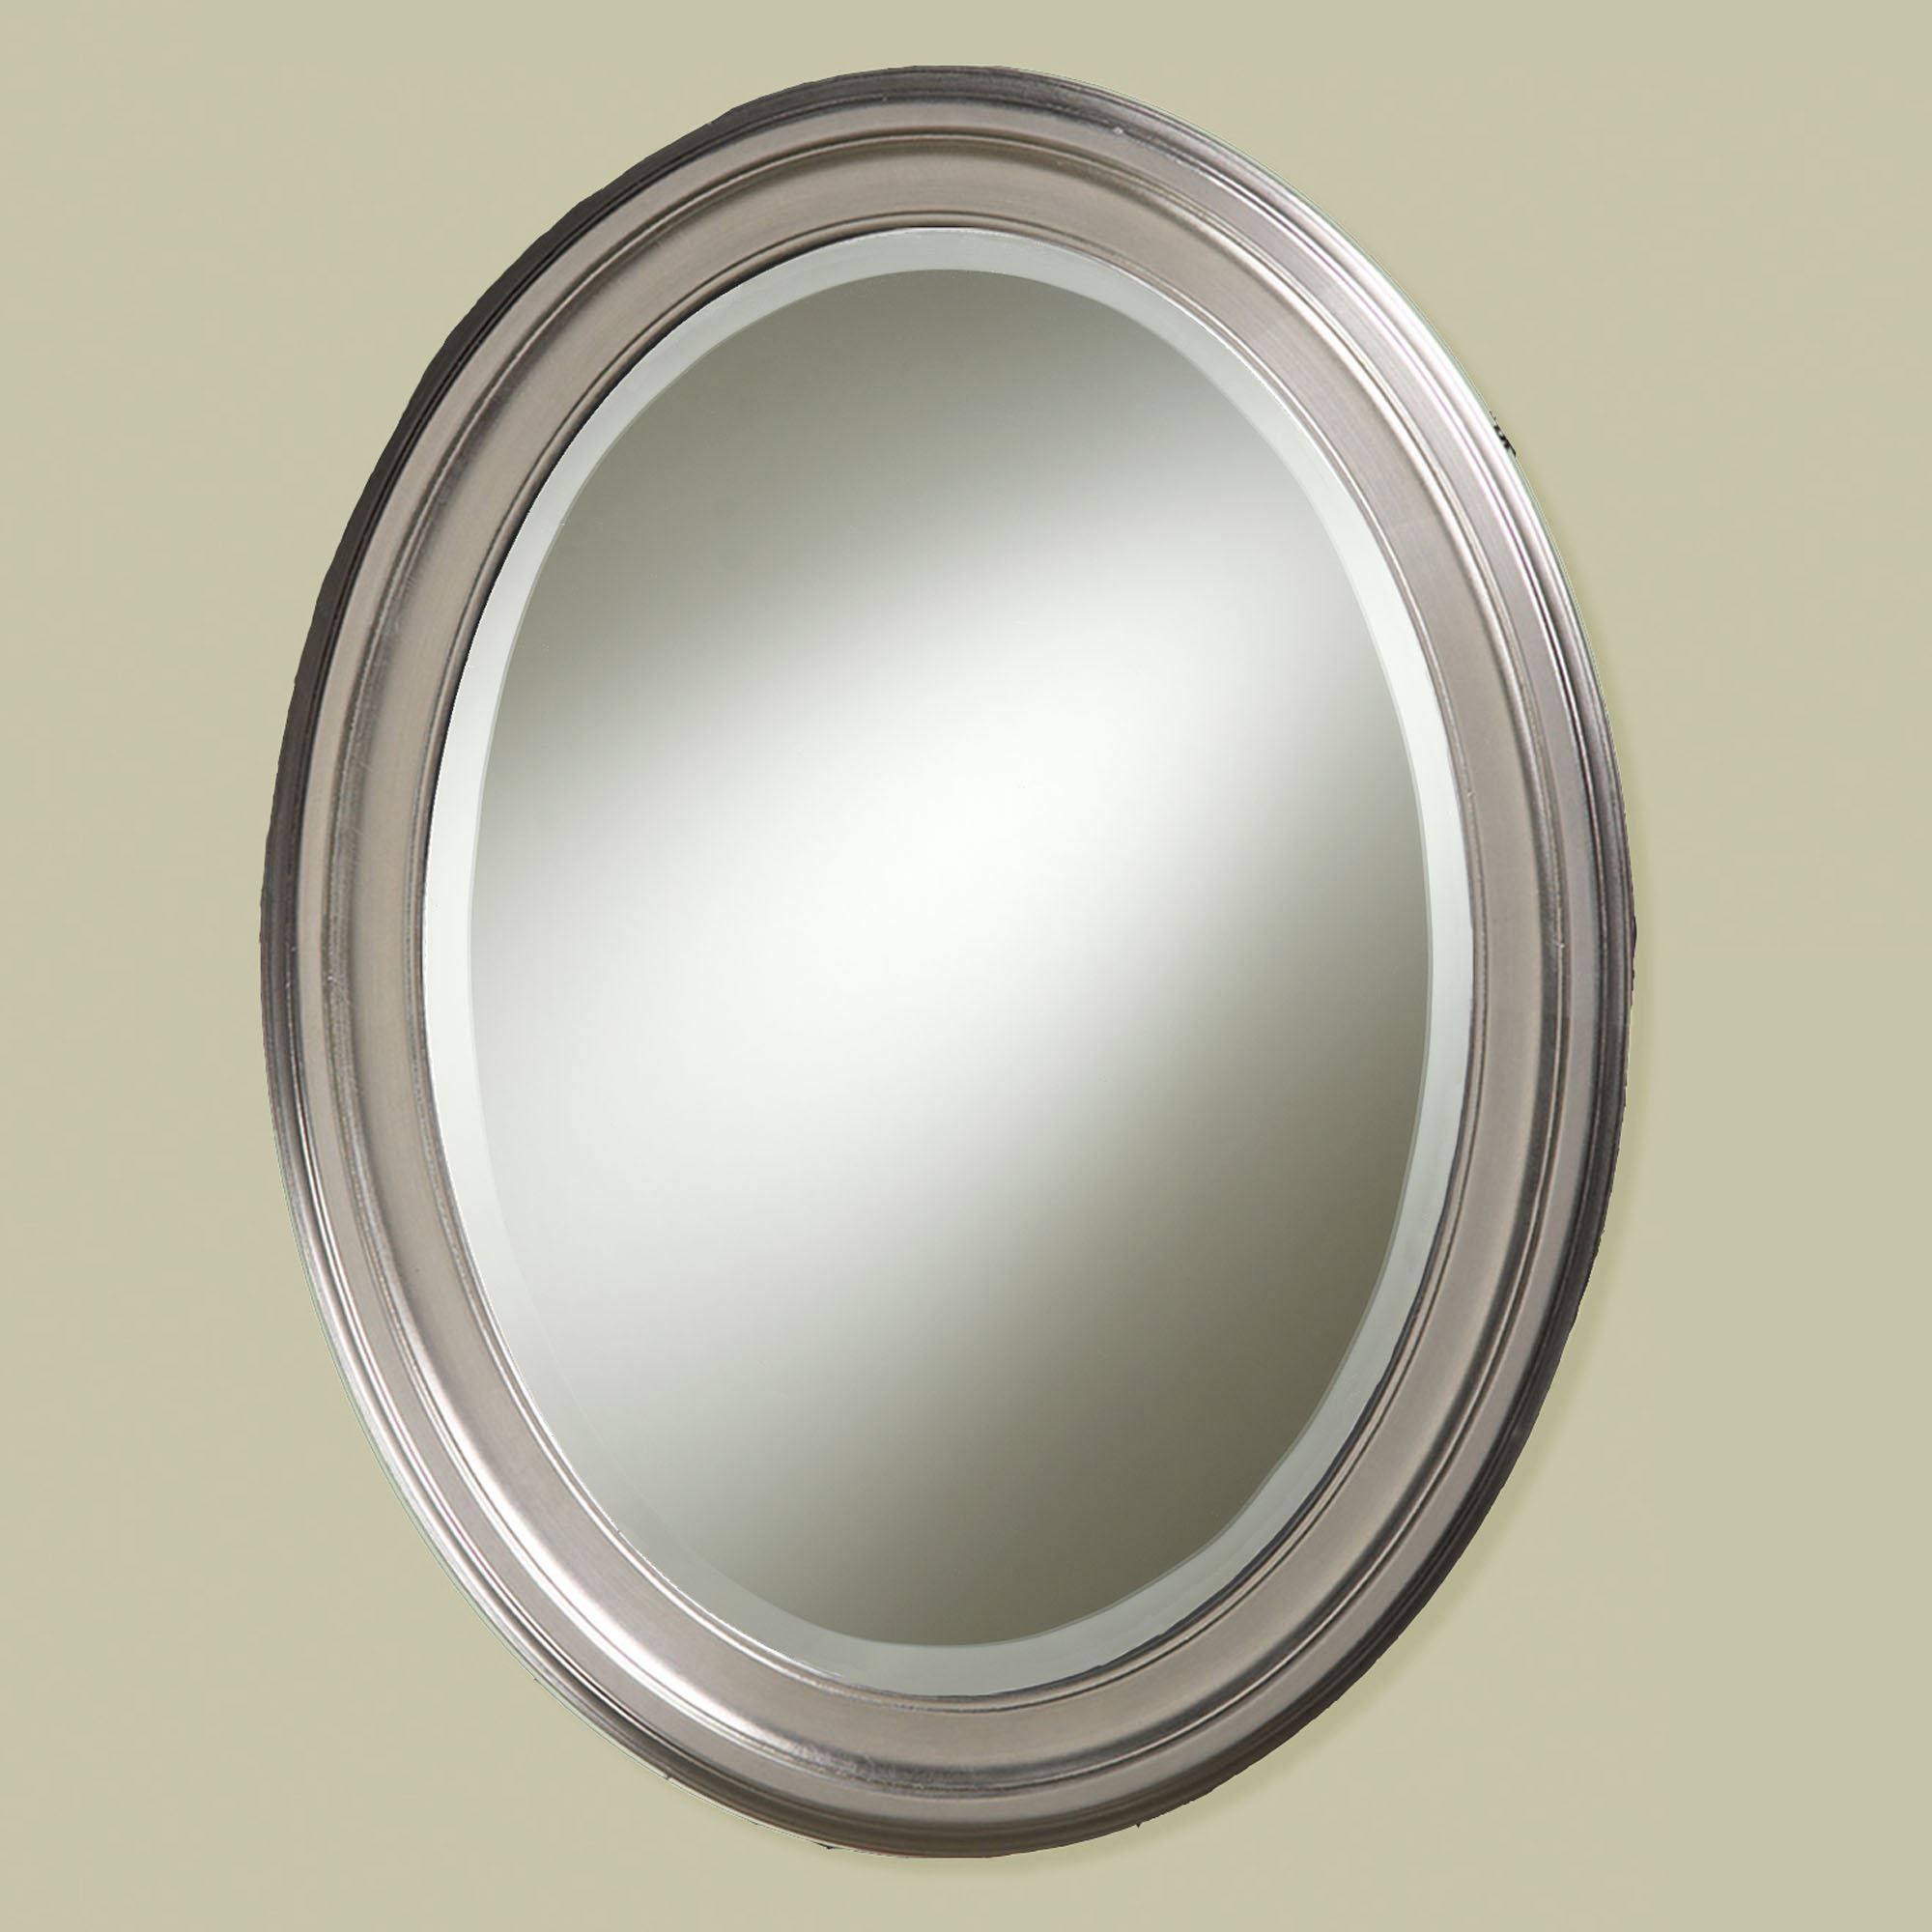 Loree Brushed Nickel Finish Oval Wall Mirror Throughout Nickel Floating Wall Mirrors (View 6 of 15)